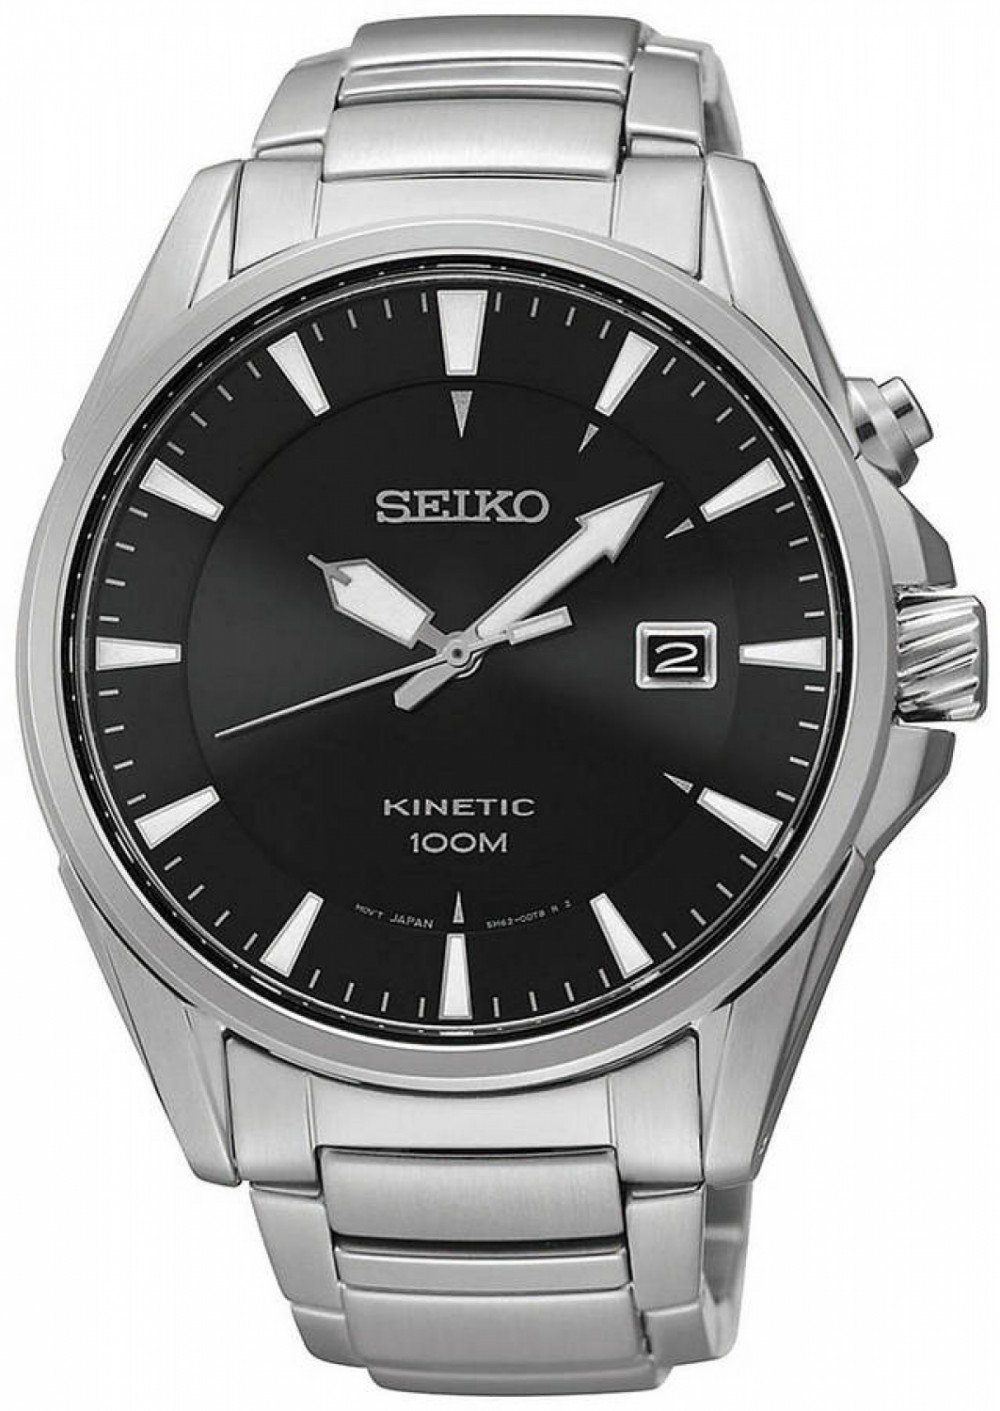 Top 34+ imagen seiko kinetic stainless steel watch